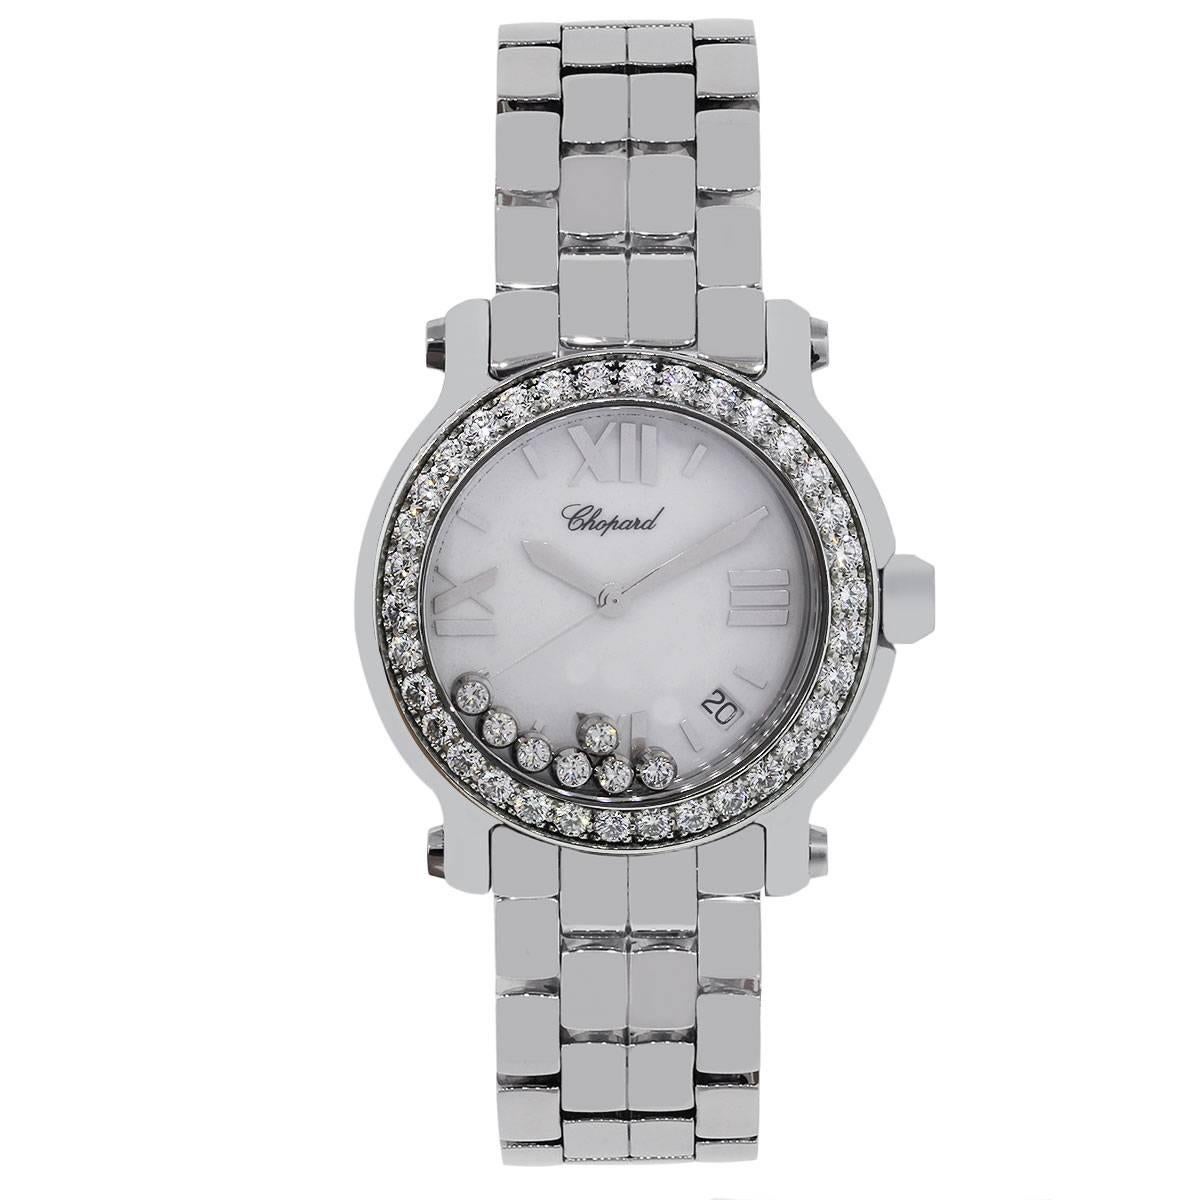 Brand: Chopard
MPN: 8475
Model: Happy Sport
Case Material: Stainless steel
Case Diameter: 36mm
Crystal: Scratch resistant sapphire
Bezel: Fixed stainless steel diamond bezel
Dial: White dial with roman numeral hour markers with floating diamonds.